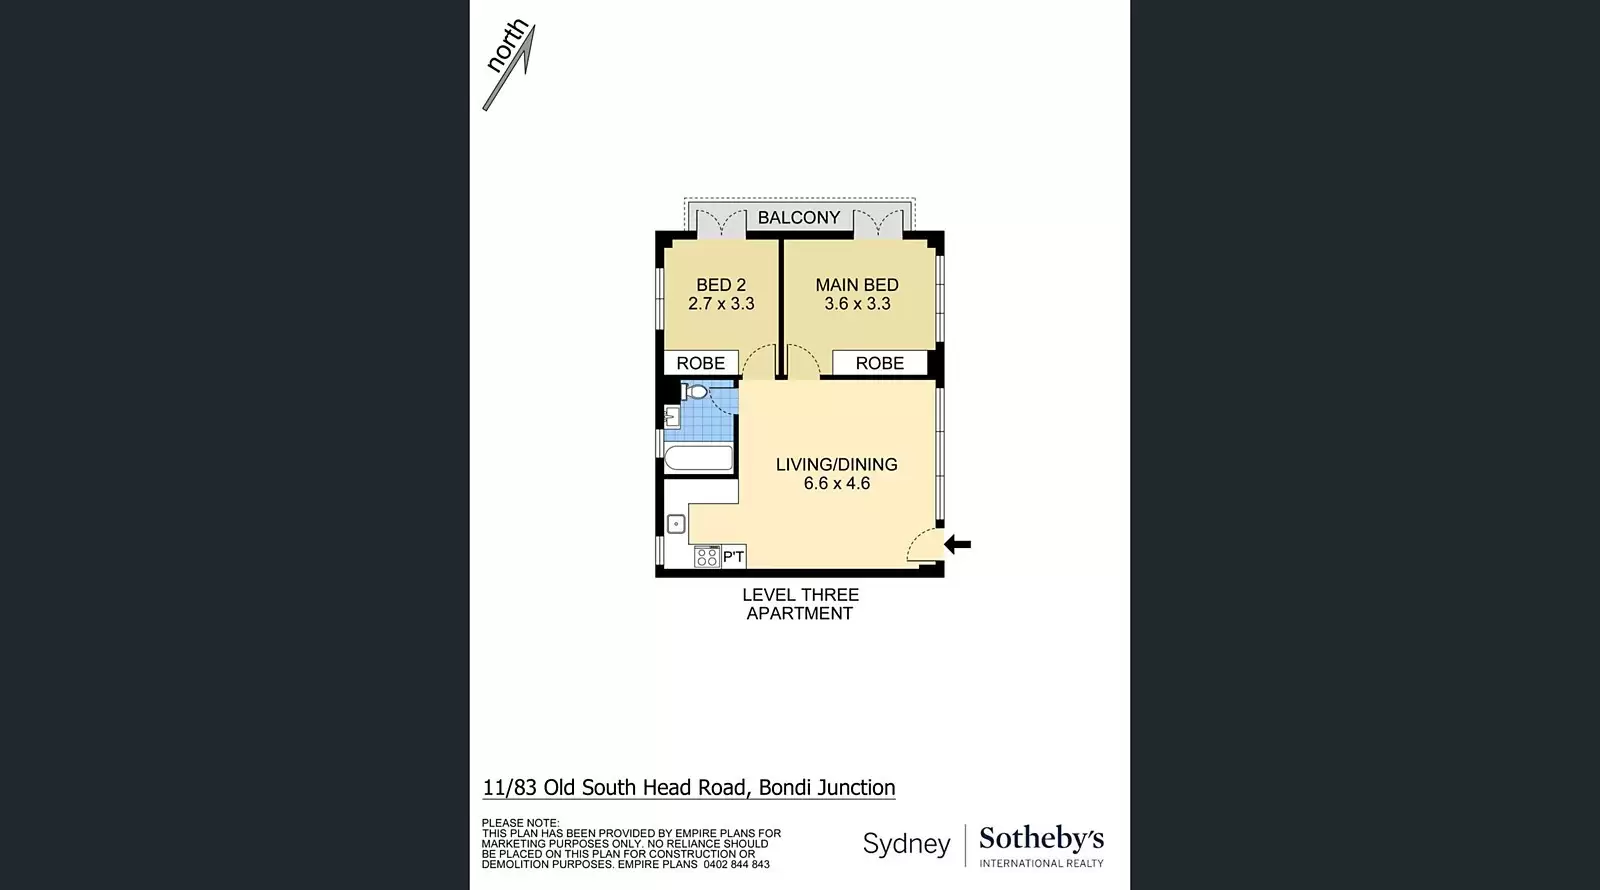 11/83 Old South Head Road, Bondi Junction Leased by Sydney Sotheby's International Realty - image 7